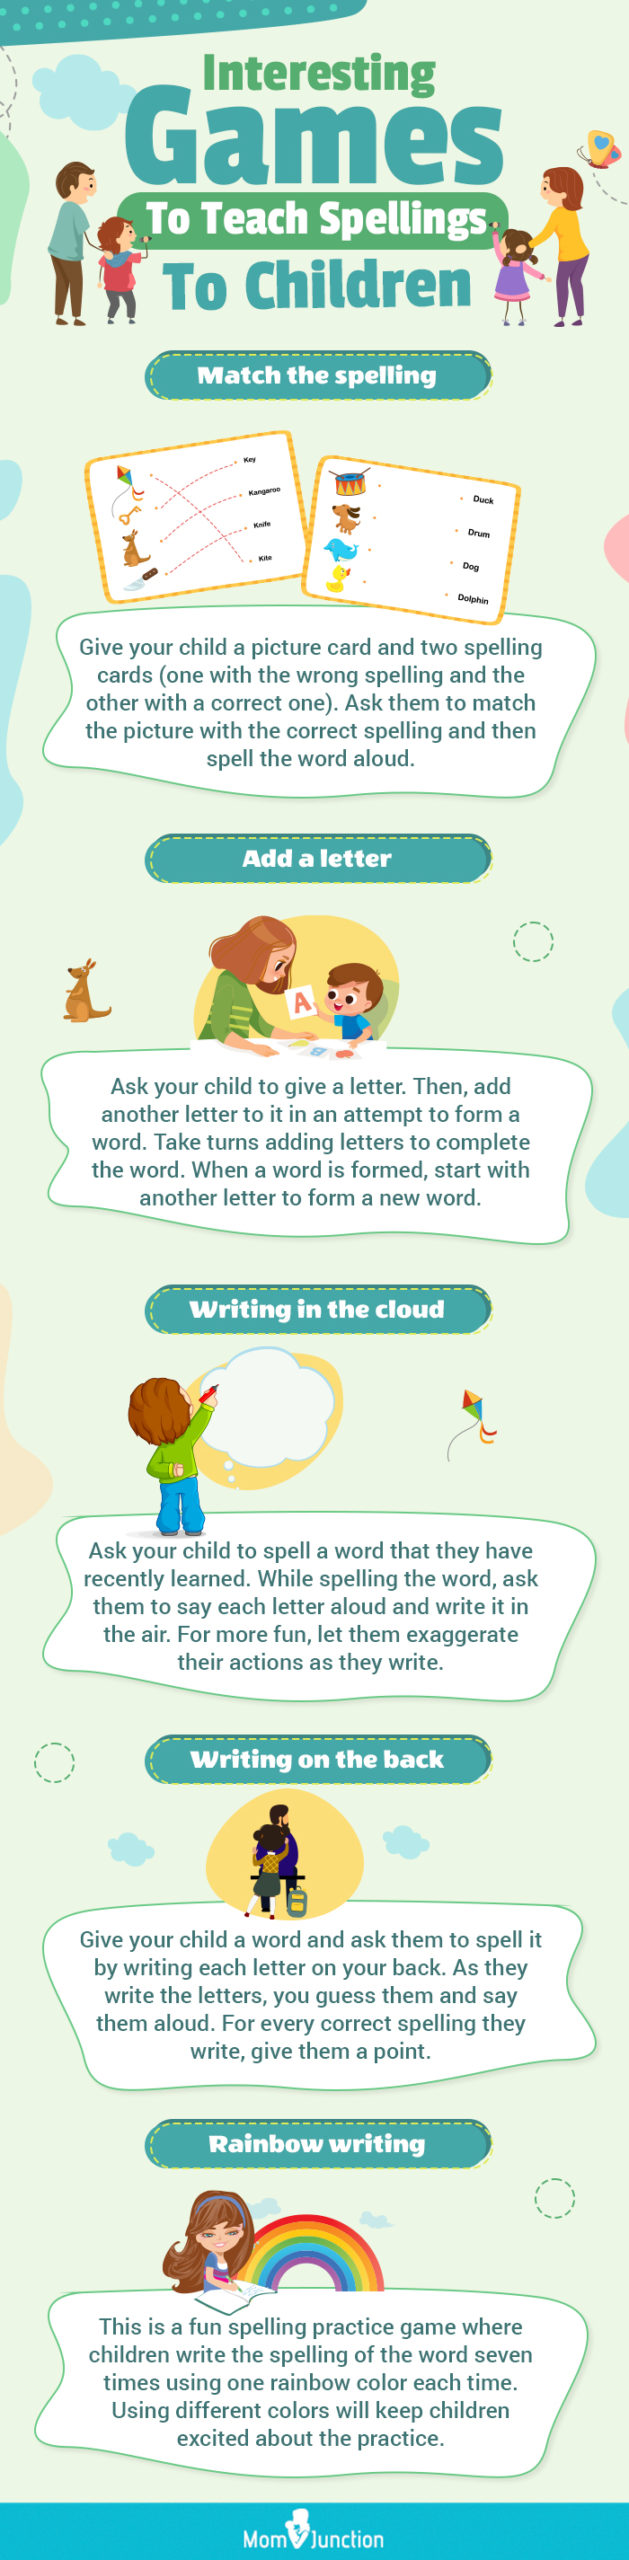 interesting games to teach spellings to children [infographic]